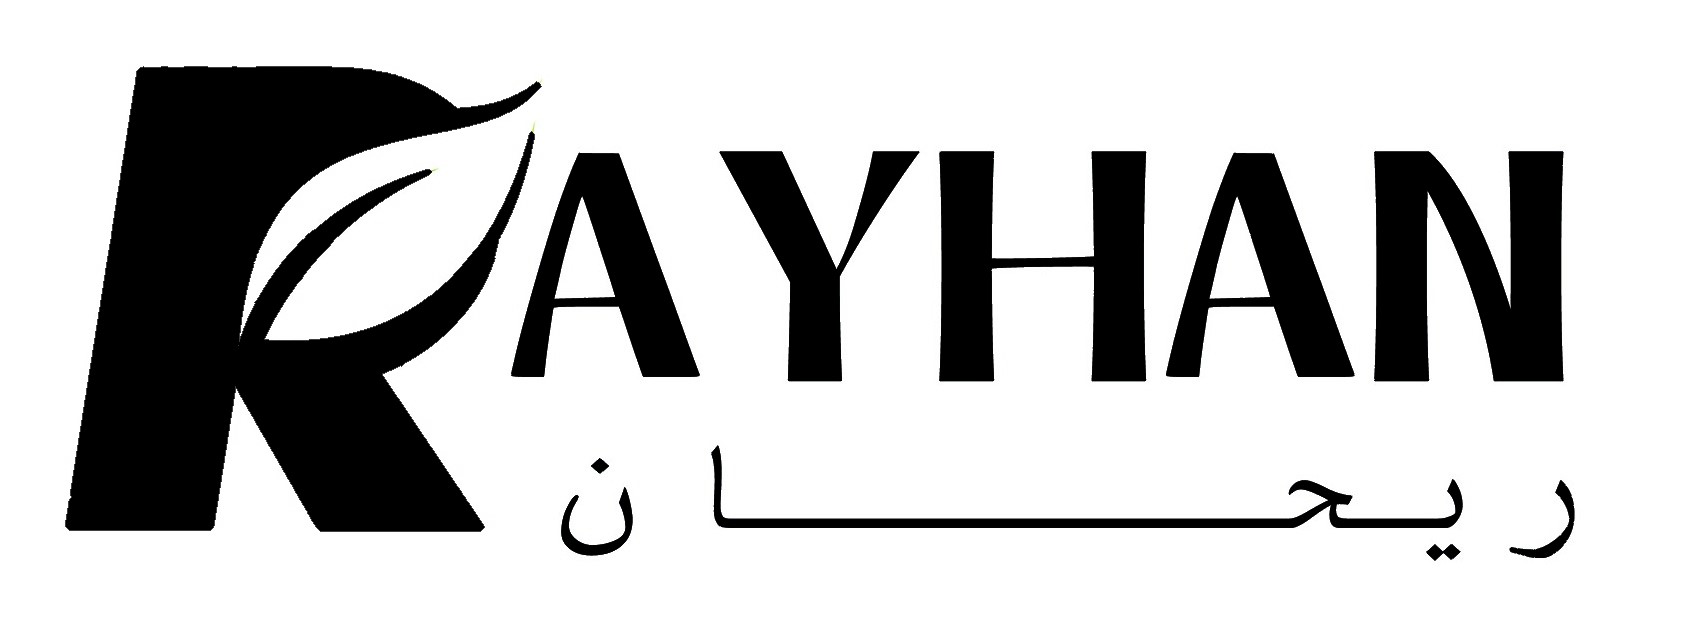 Ray7an - ريحان